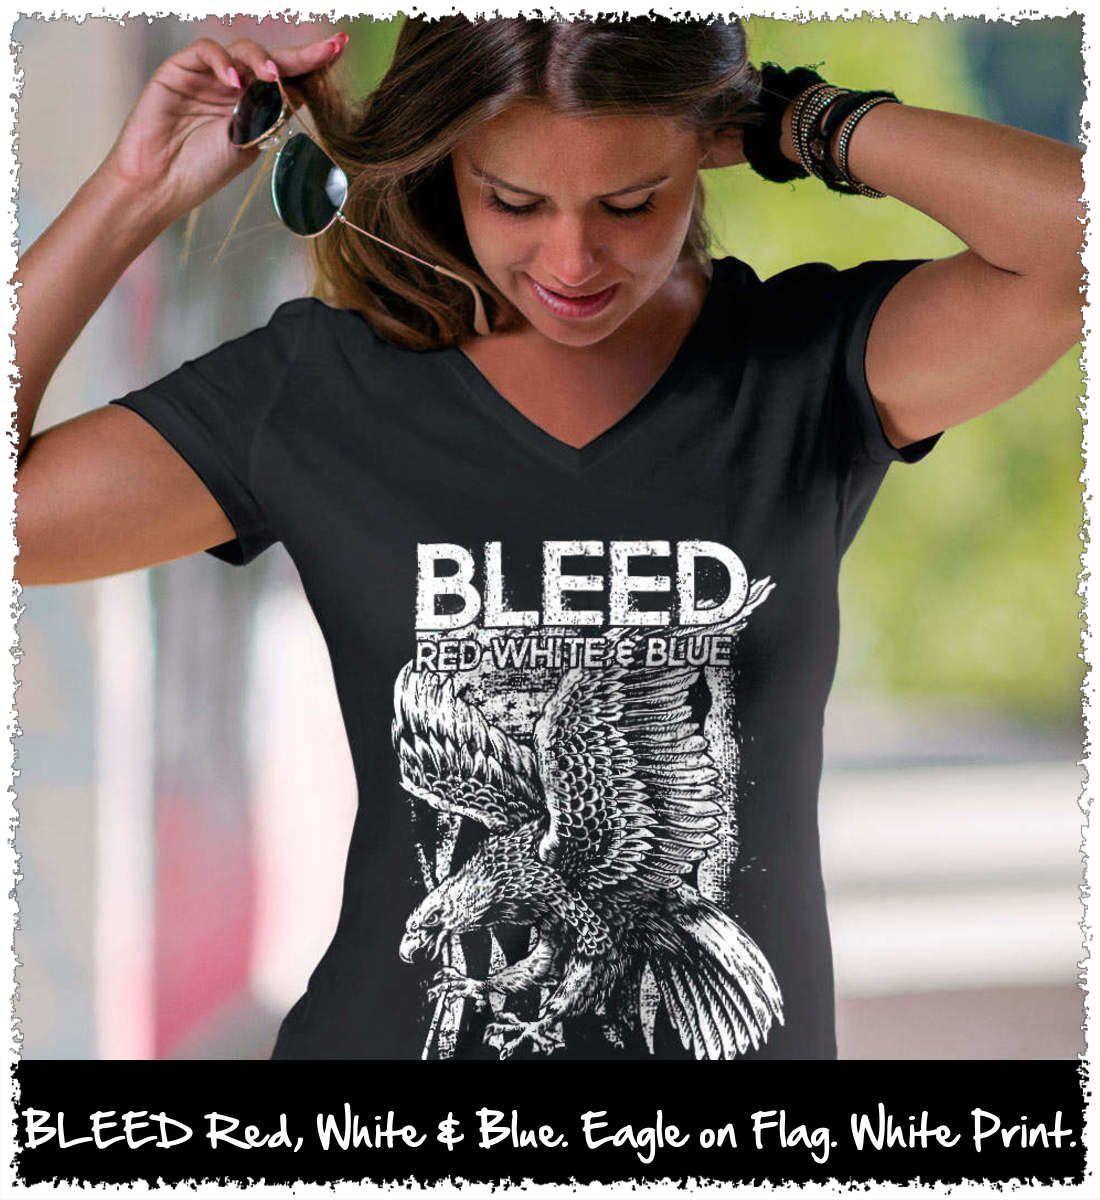 Lady Red White and Blue Eagles Logo - BLEED Red, White & Blue. Eagle on Flag. White Print. Women's: Anvil